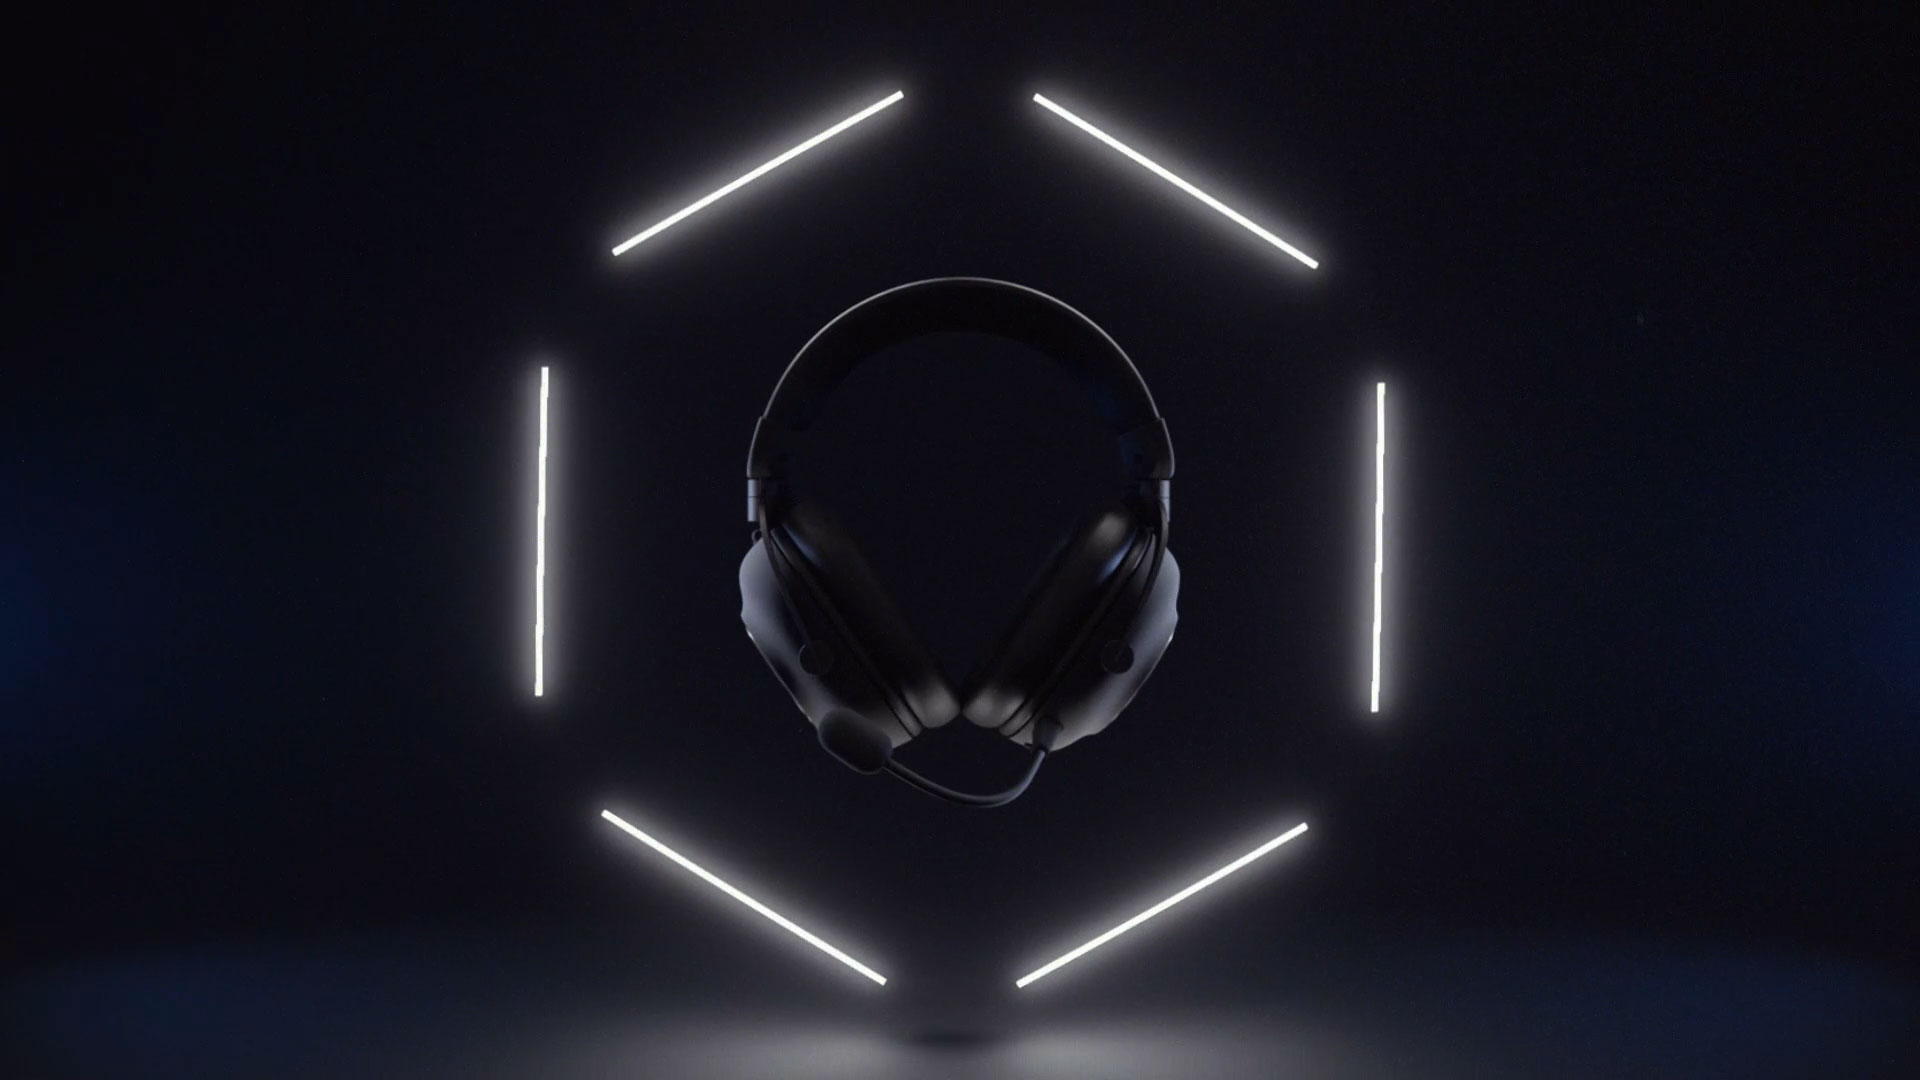 Logitech G PRO X 2 LIGHTSPEED Wireless Gaming Headset Features Groundbreaking Graphene Audio Technology Giving Esports Athletes and Gamers the Edge for Victory